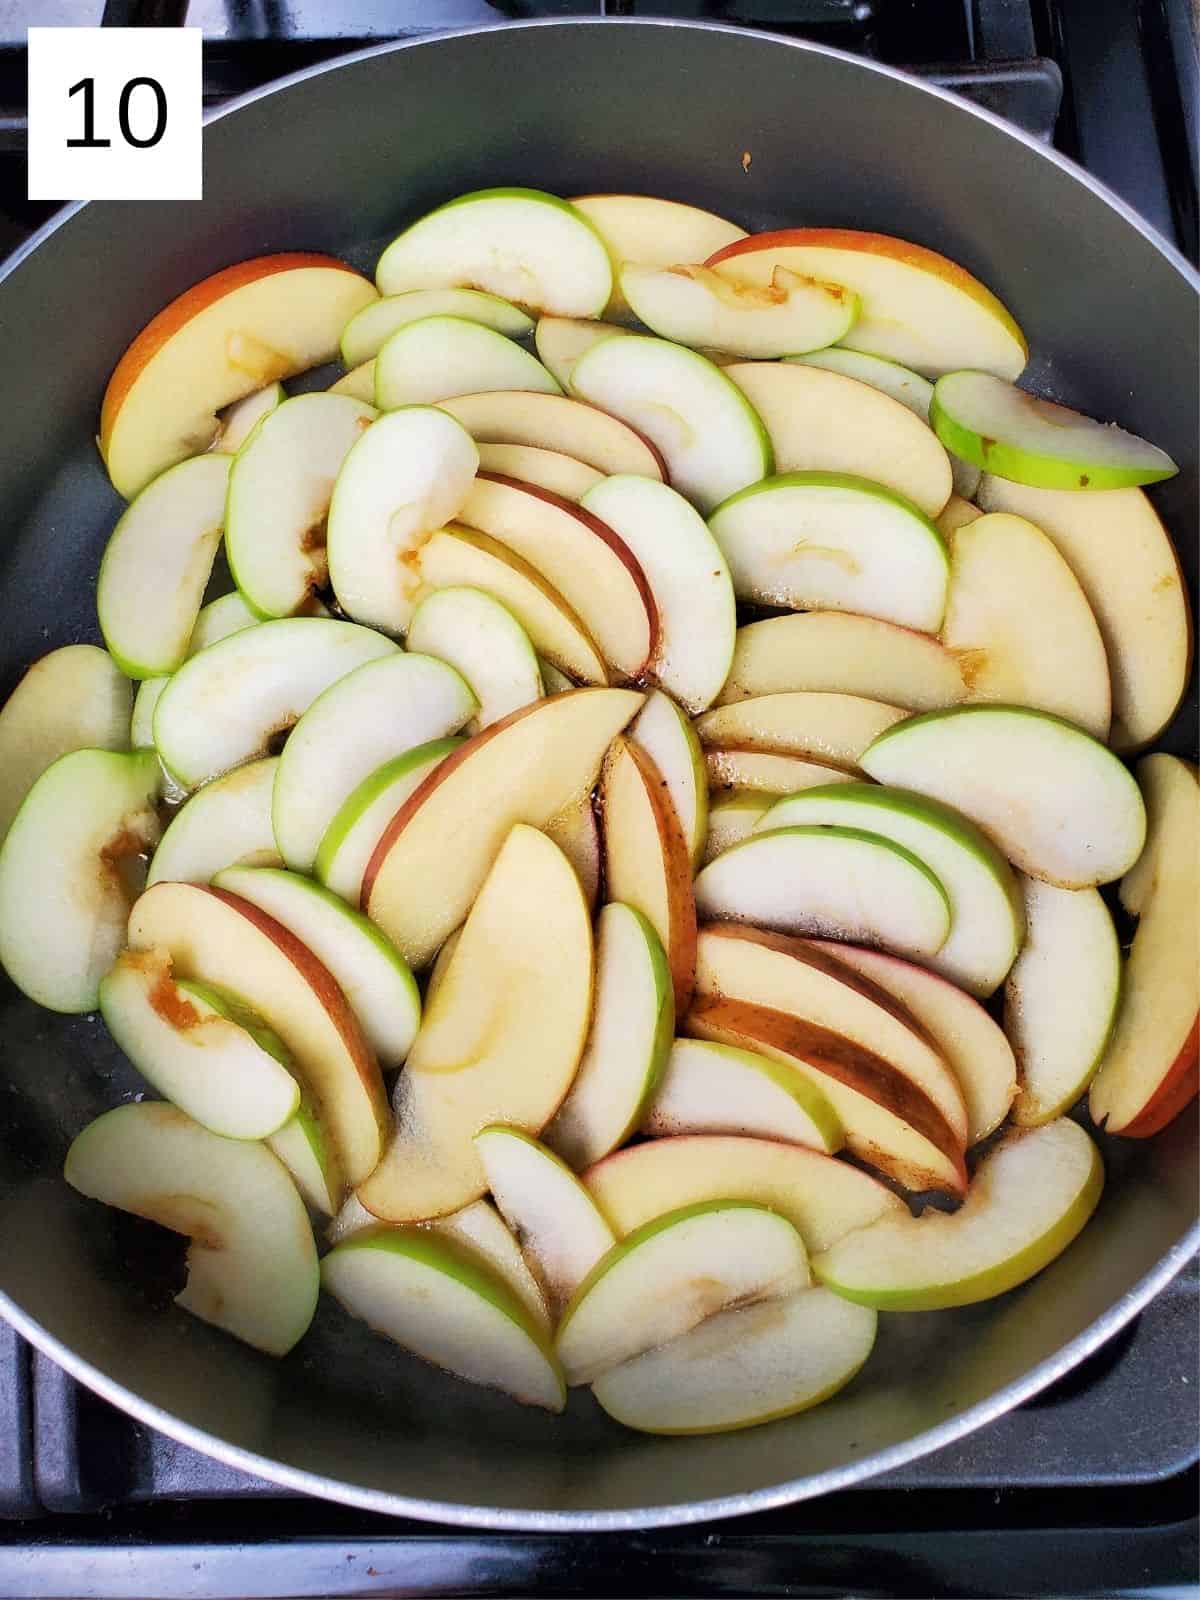 evenly cut slices of apples layered in a pan.